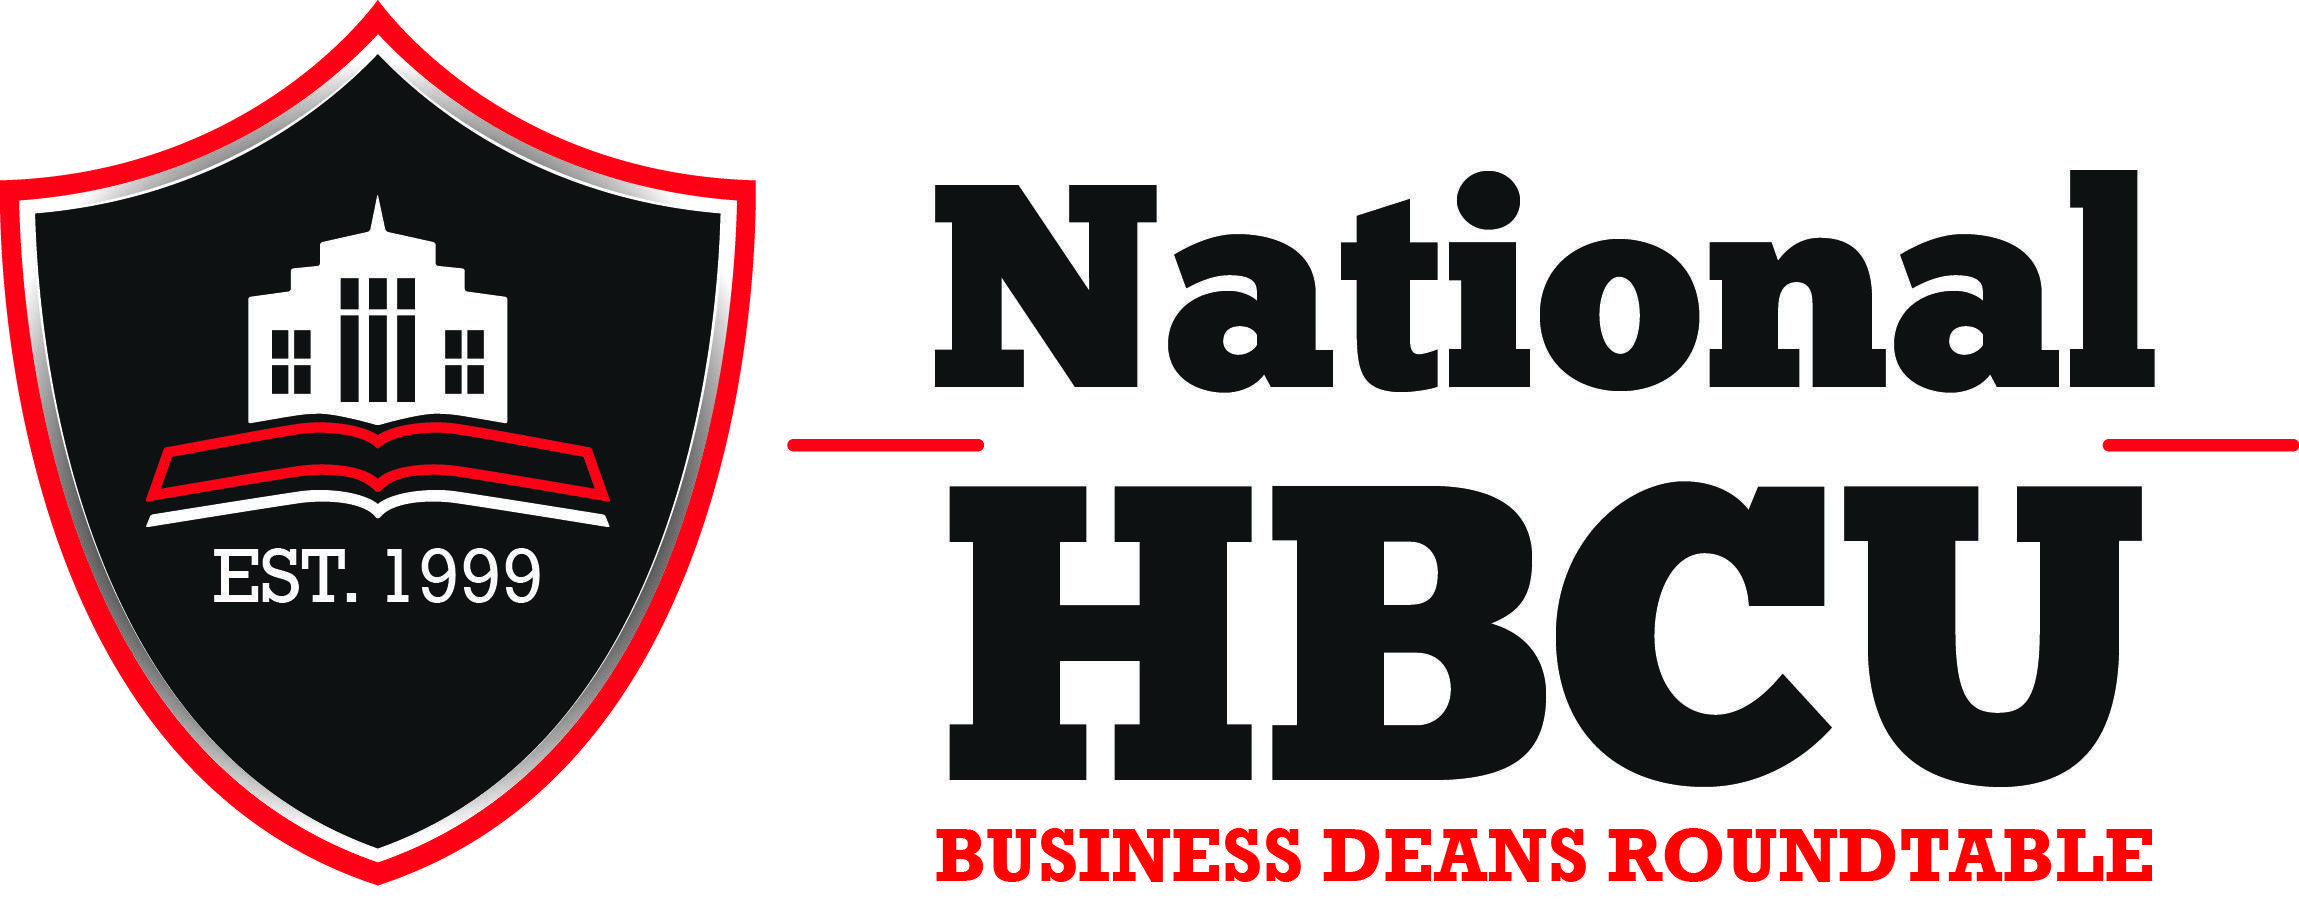 HBCU Logo - About Us - National HBCU | Business Deans Roundtable